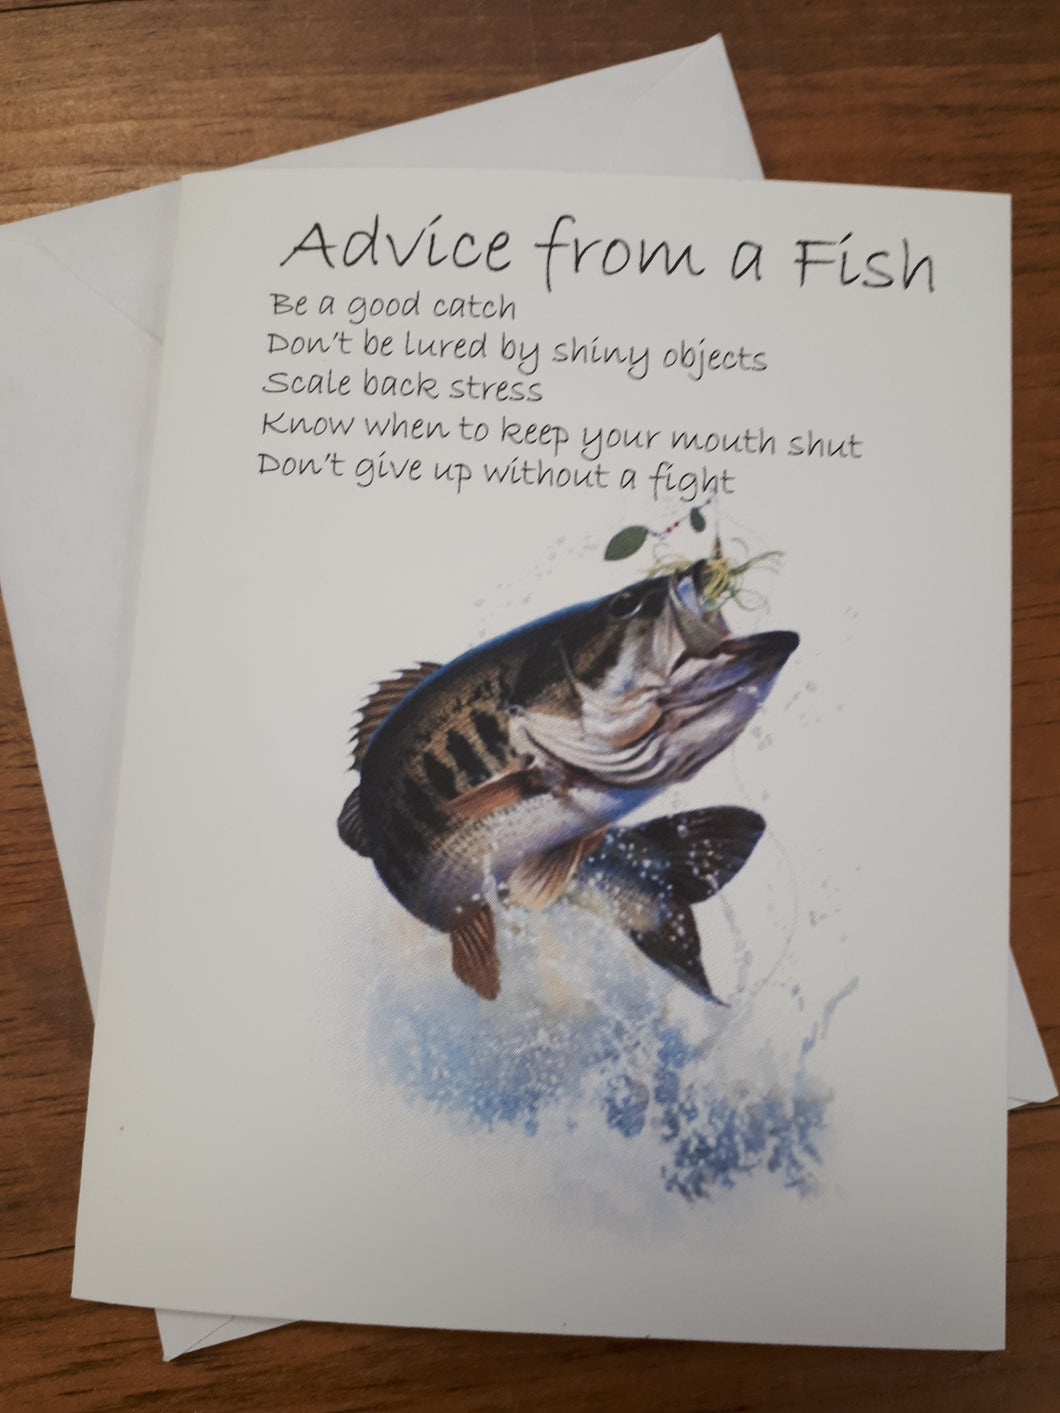 Advice from a Fish Greeting Card – curious?